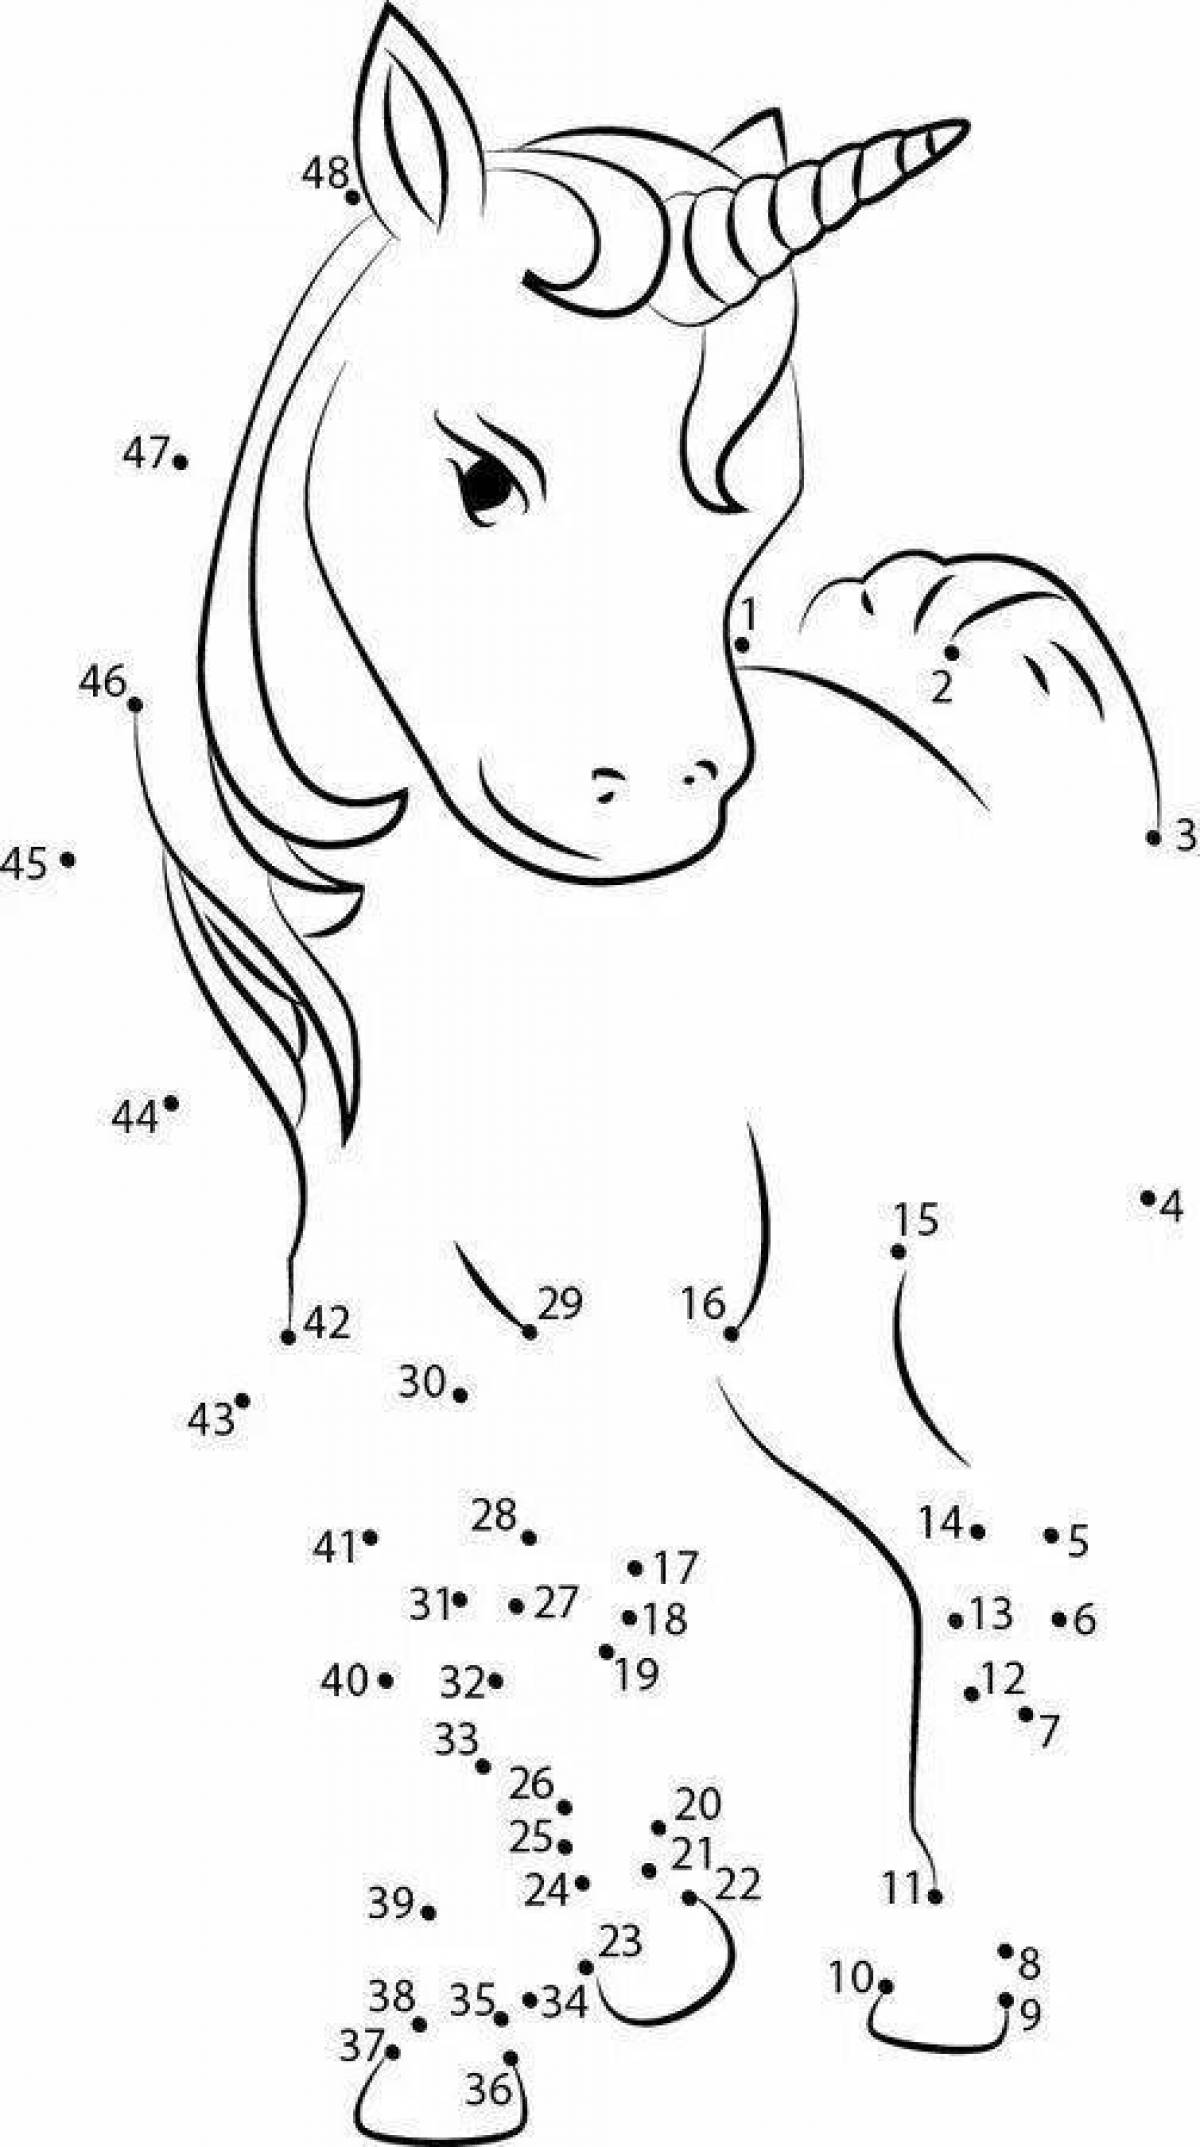 Wonderful unicorn coloring by numbers